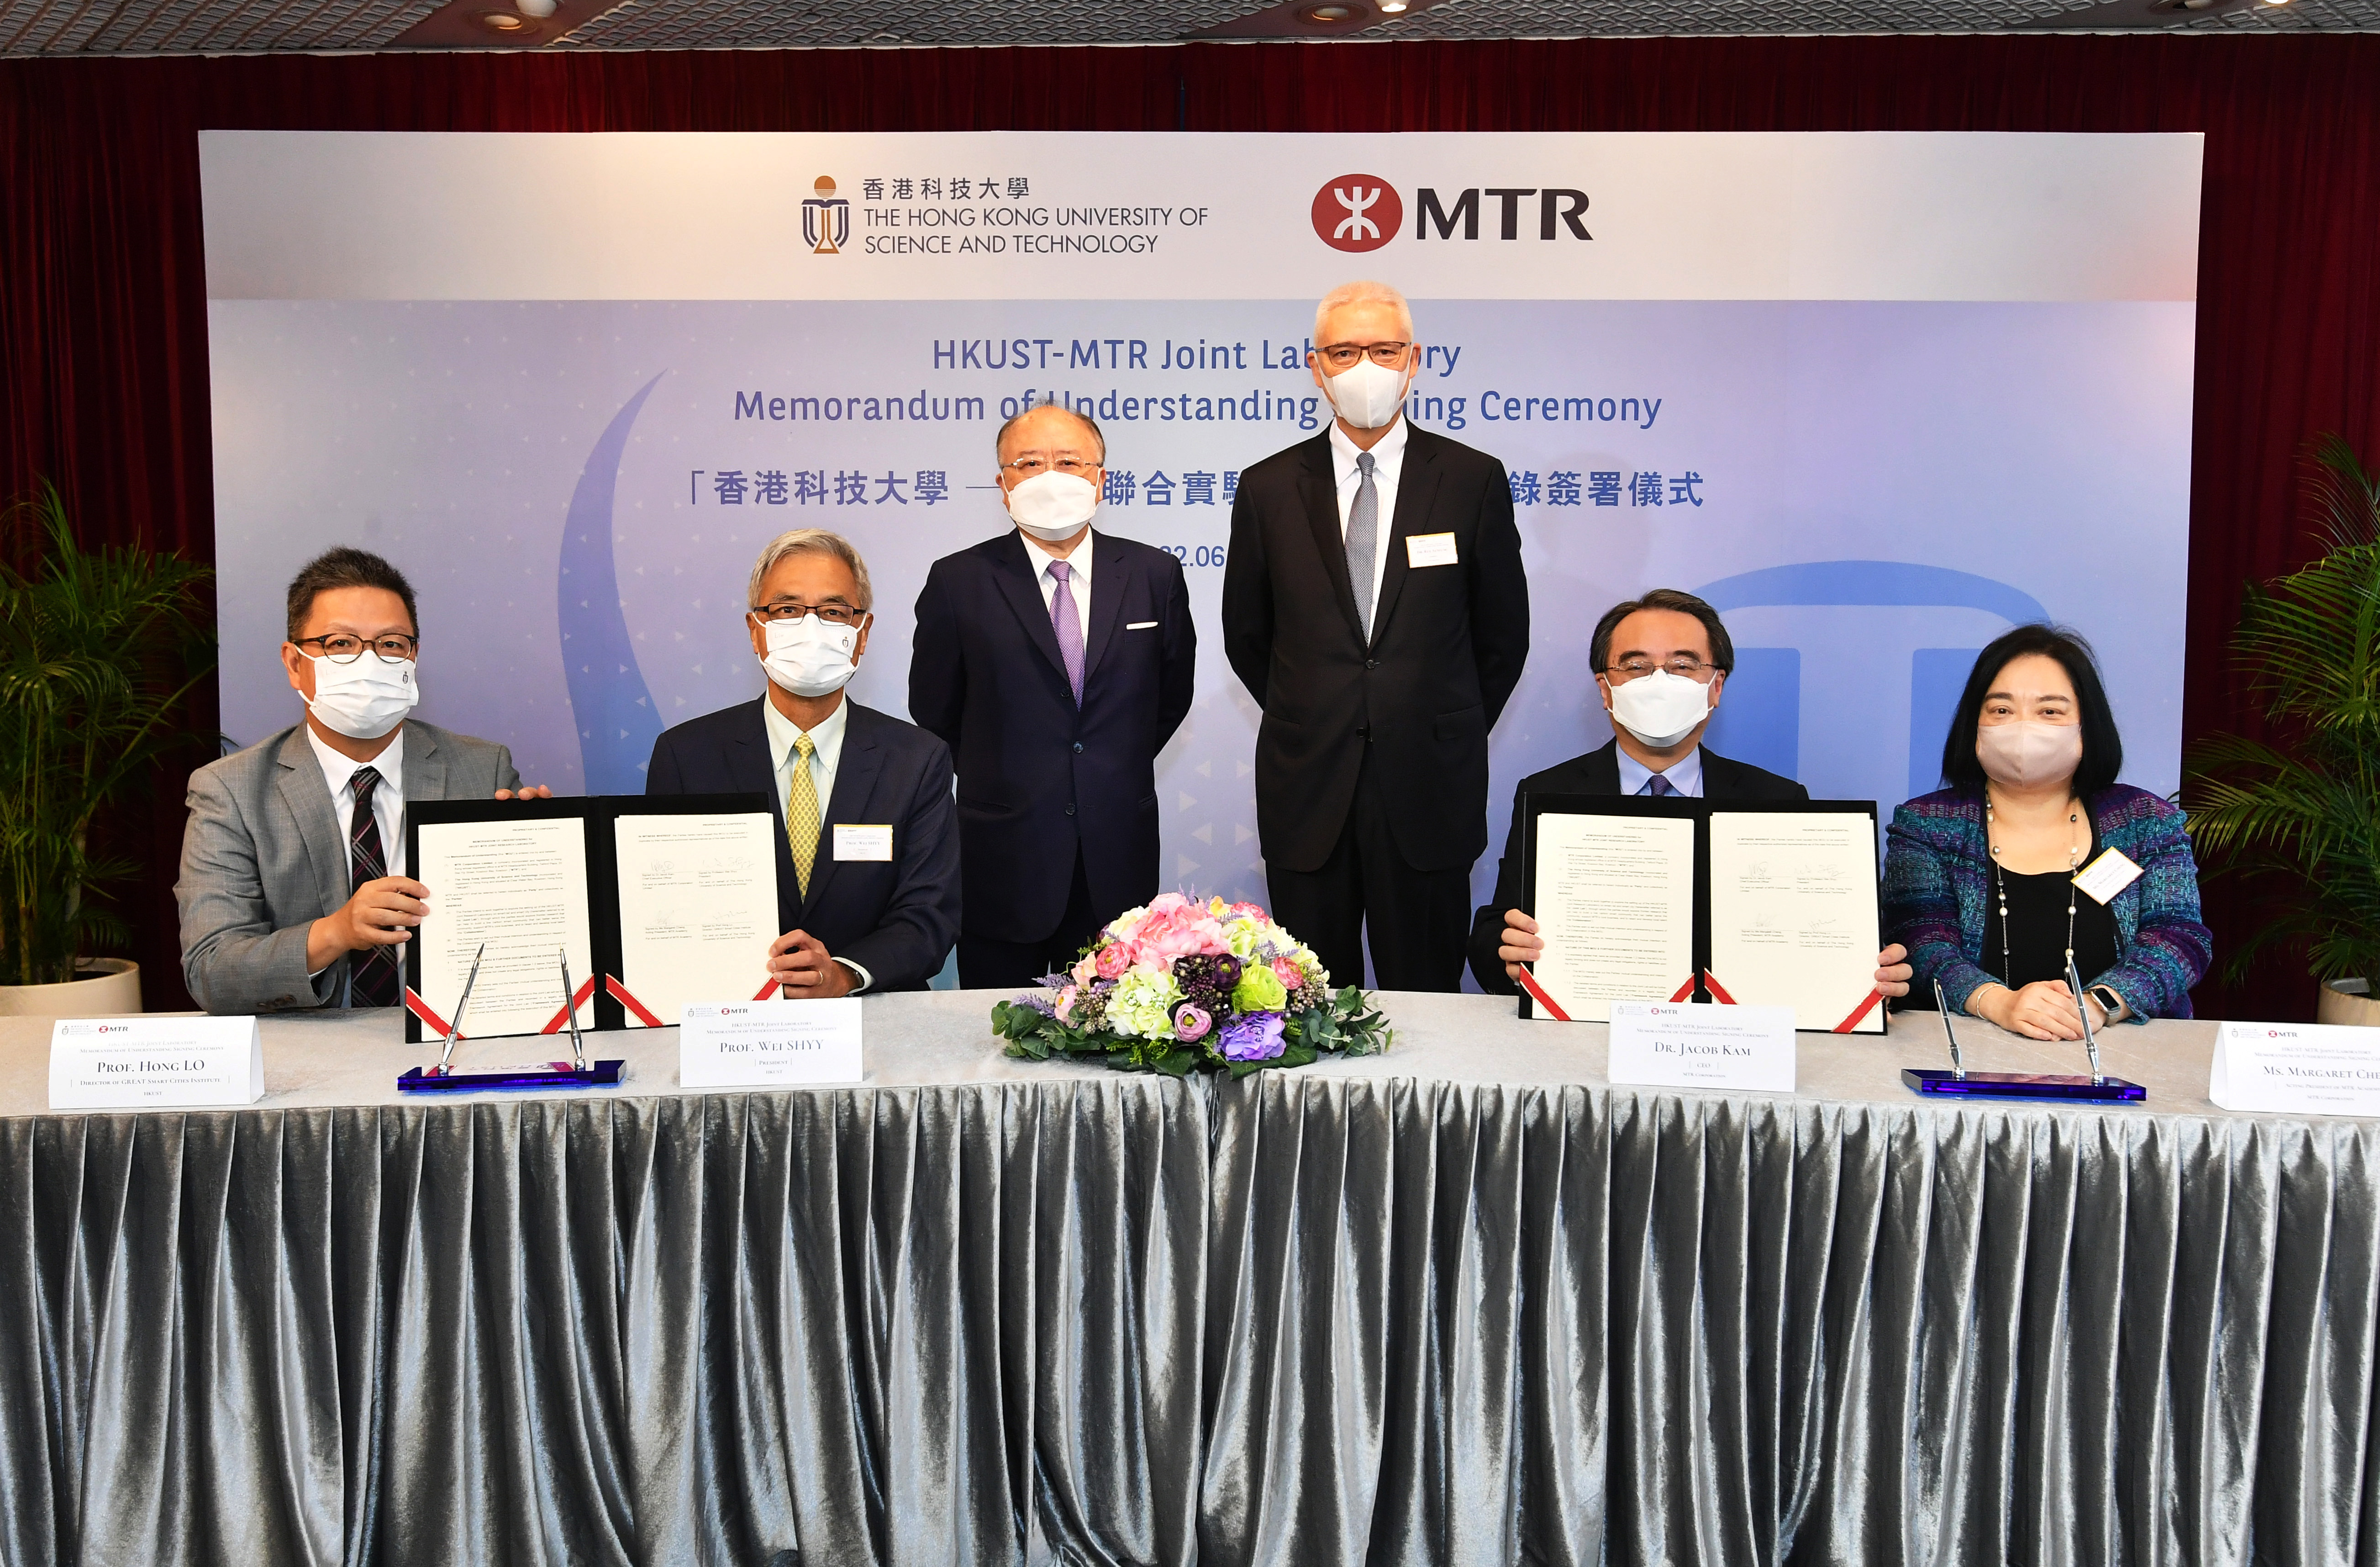 Witnessed by Dr. Rex Auyeung, Chairman of MTR Corporation (3rd from right) and Mr. Andrew Liao, Council Chairman of HKUST (3rd from left), Dr. Jacob Kam, Chief Executive Officer of MTR Corporation (2nd from right), Ms. Margaret Cheng, Acting President of MTR Academy (1st from right), Professor Wei Shyy, President of HKUST (2nd from left) and Professor Lo Hong-Kam, Director of GREAT Smart Cities Institute of HKUST (1st from left) signed the MoU on 10 June 2022.